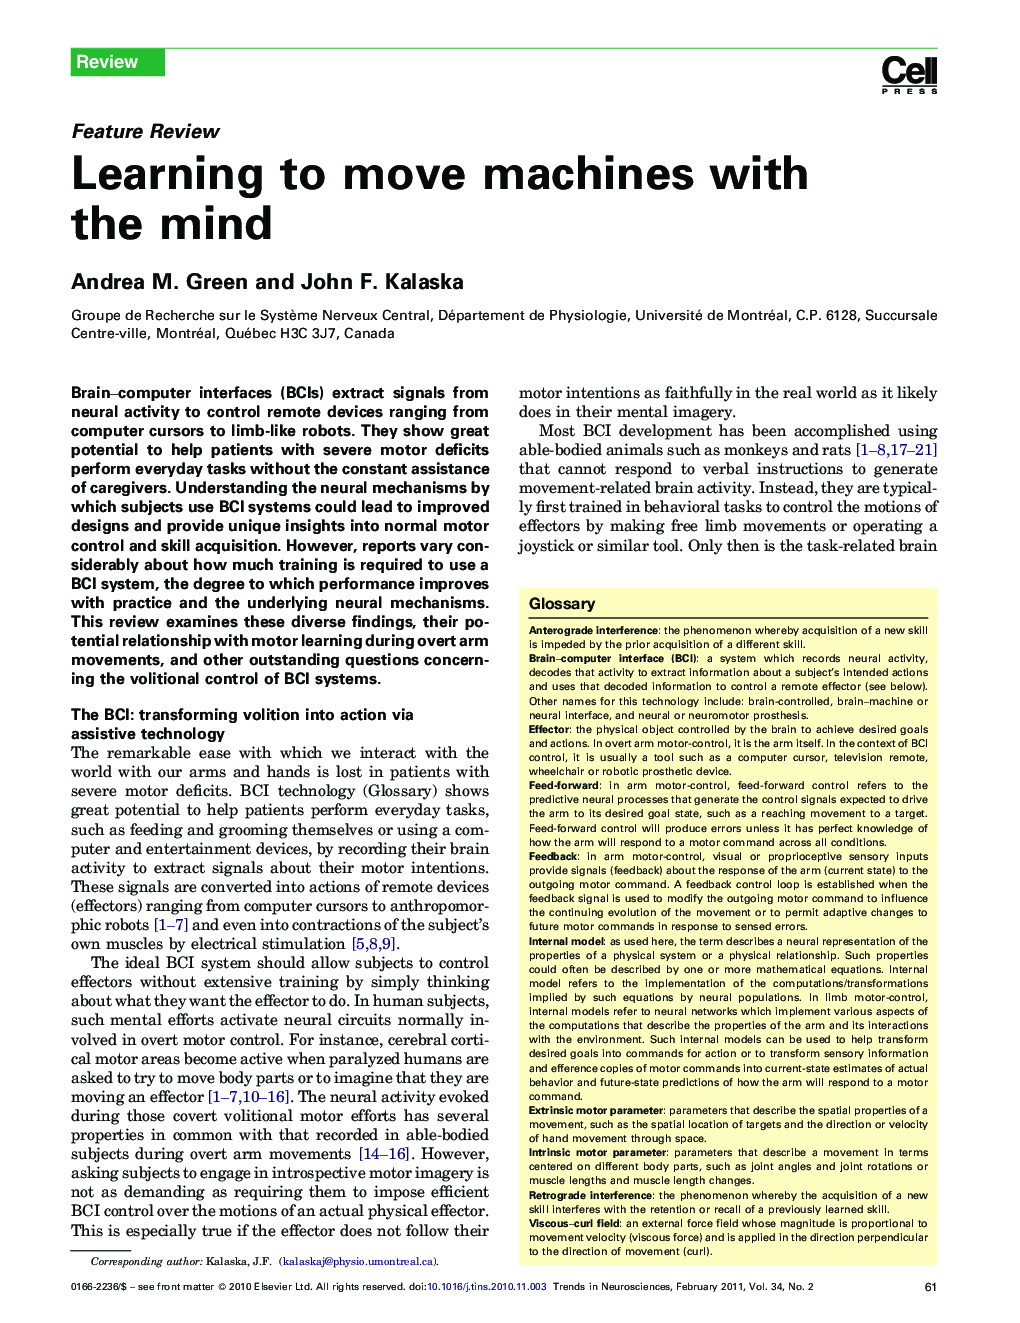 Learning to move machines with the mind